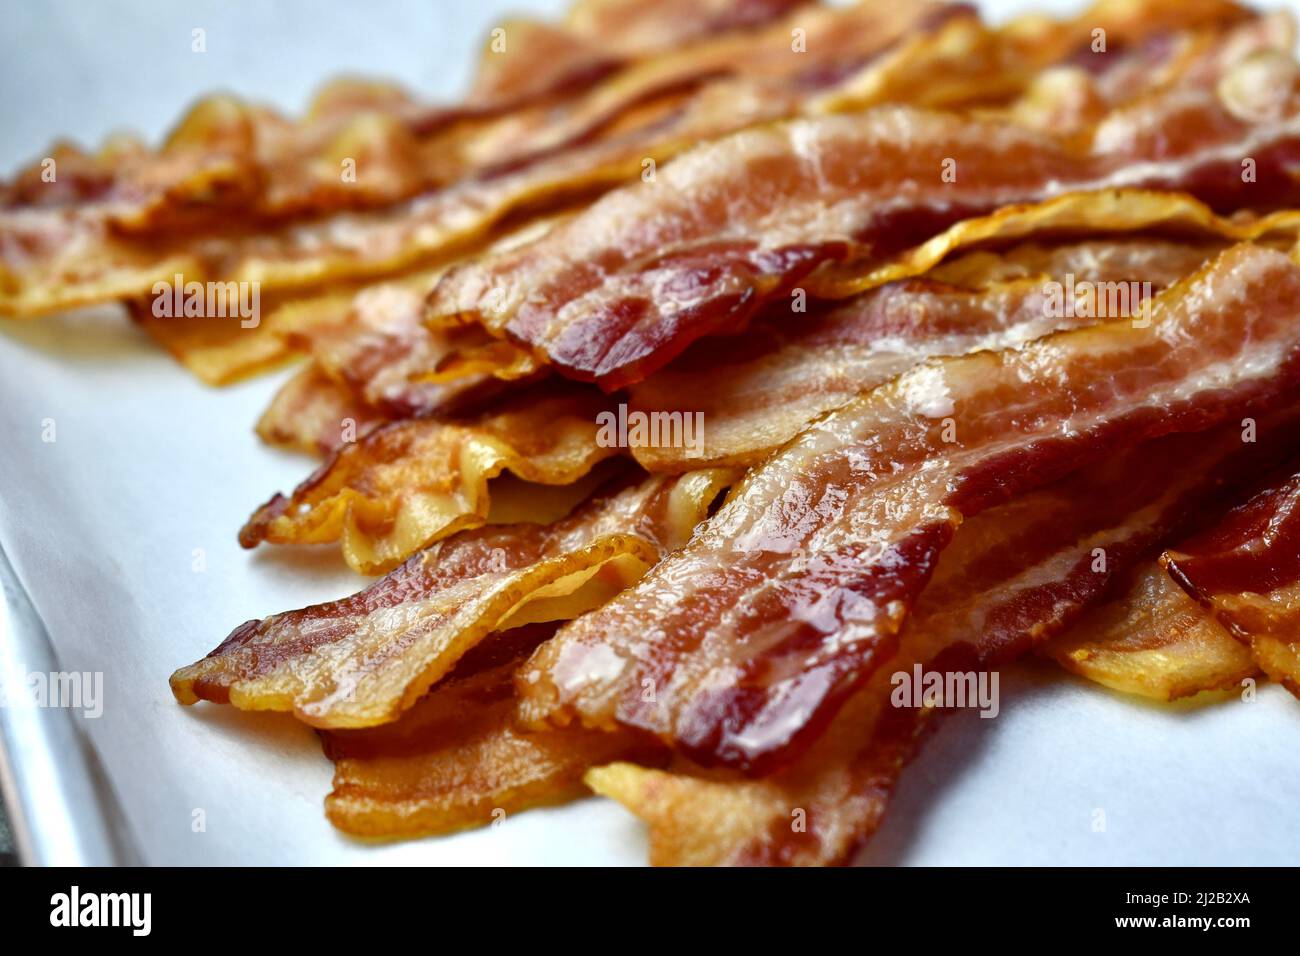 Bacon rashers on parchment lined baking pan Stock Photo